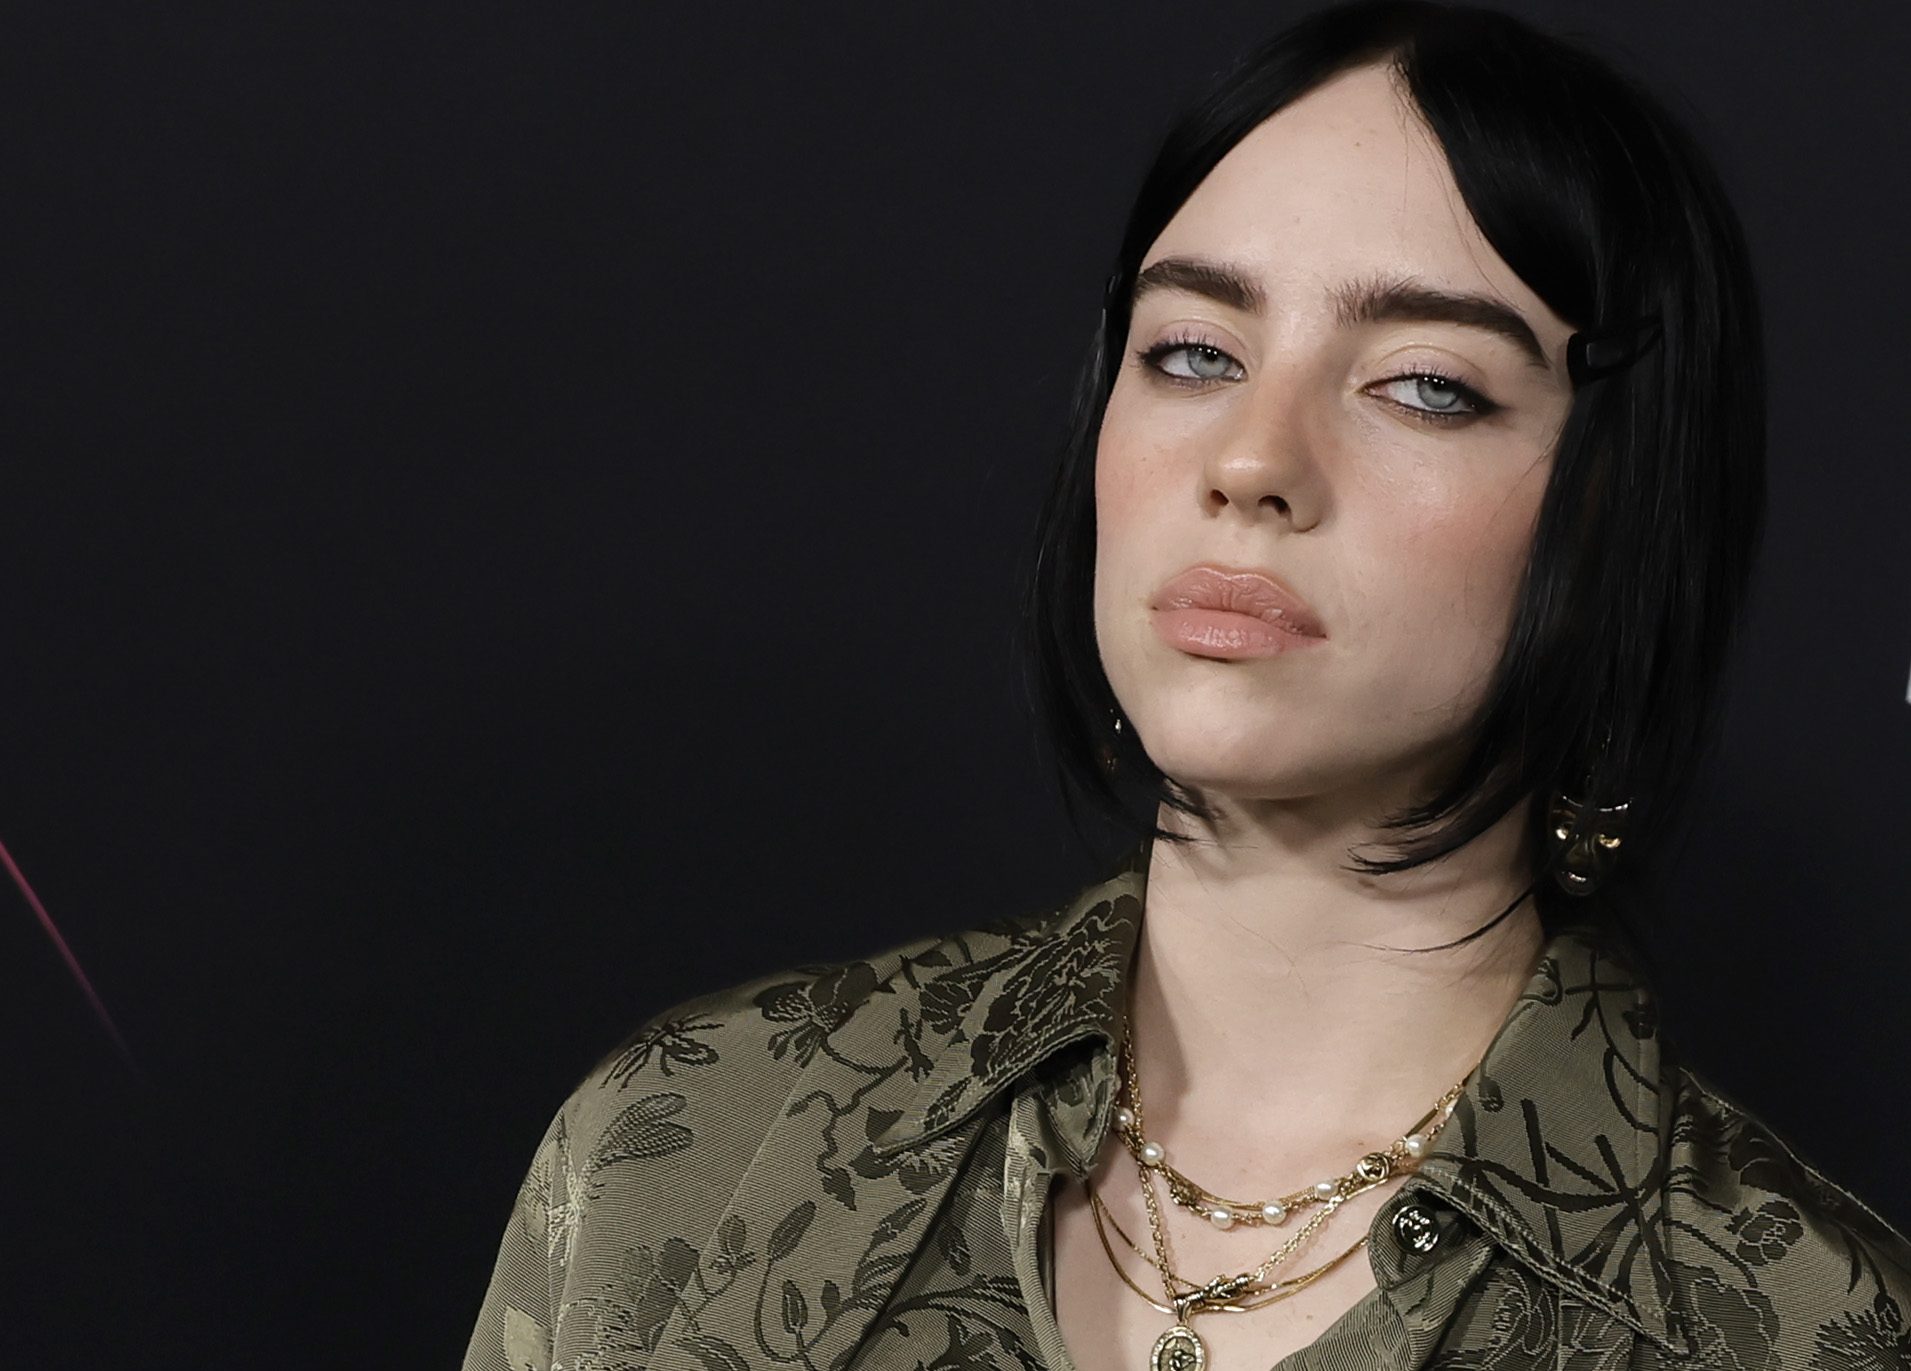 Billie Eilish’s 21st Birthday Party Saw Her Hosting In A Sultry Santa Claus Suit